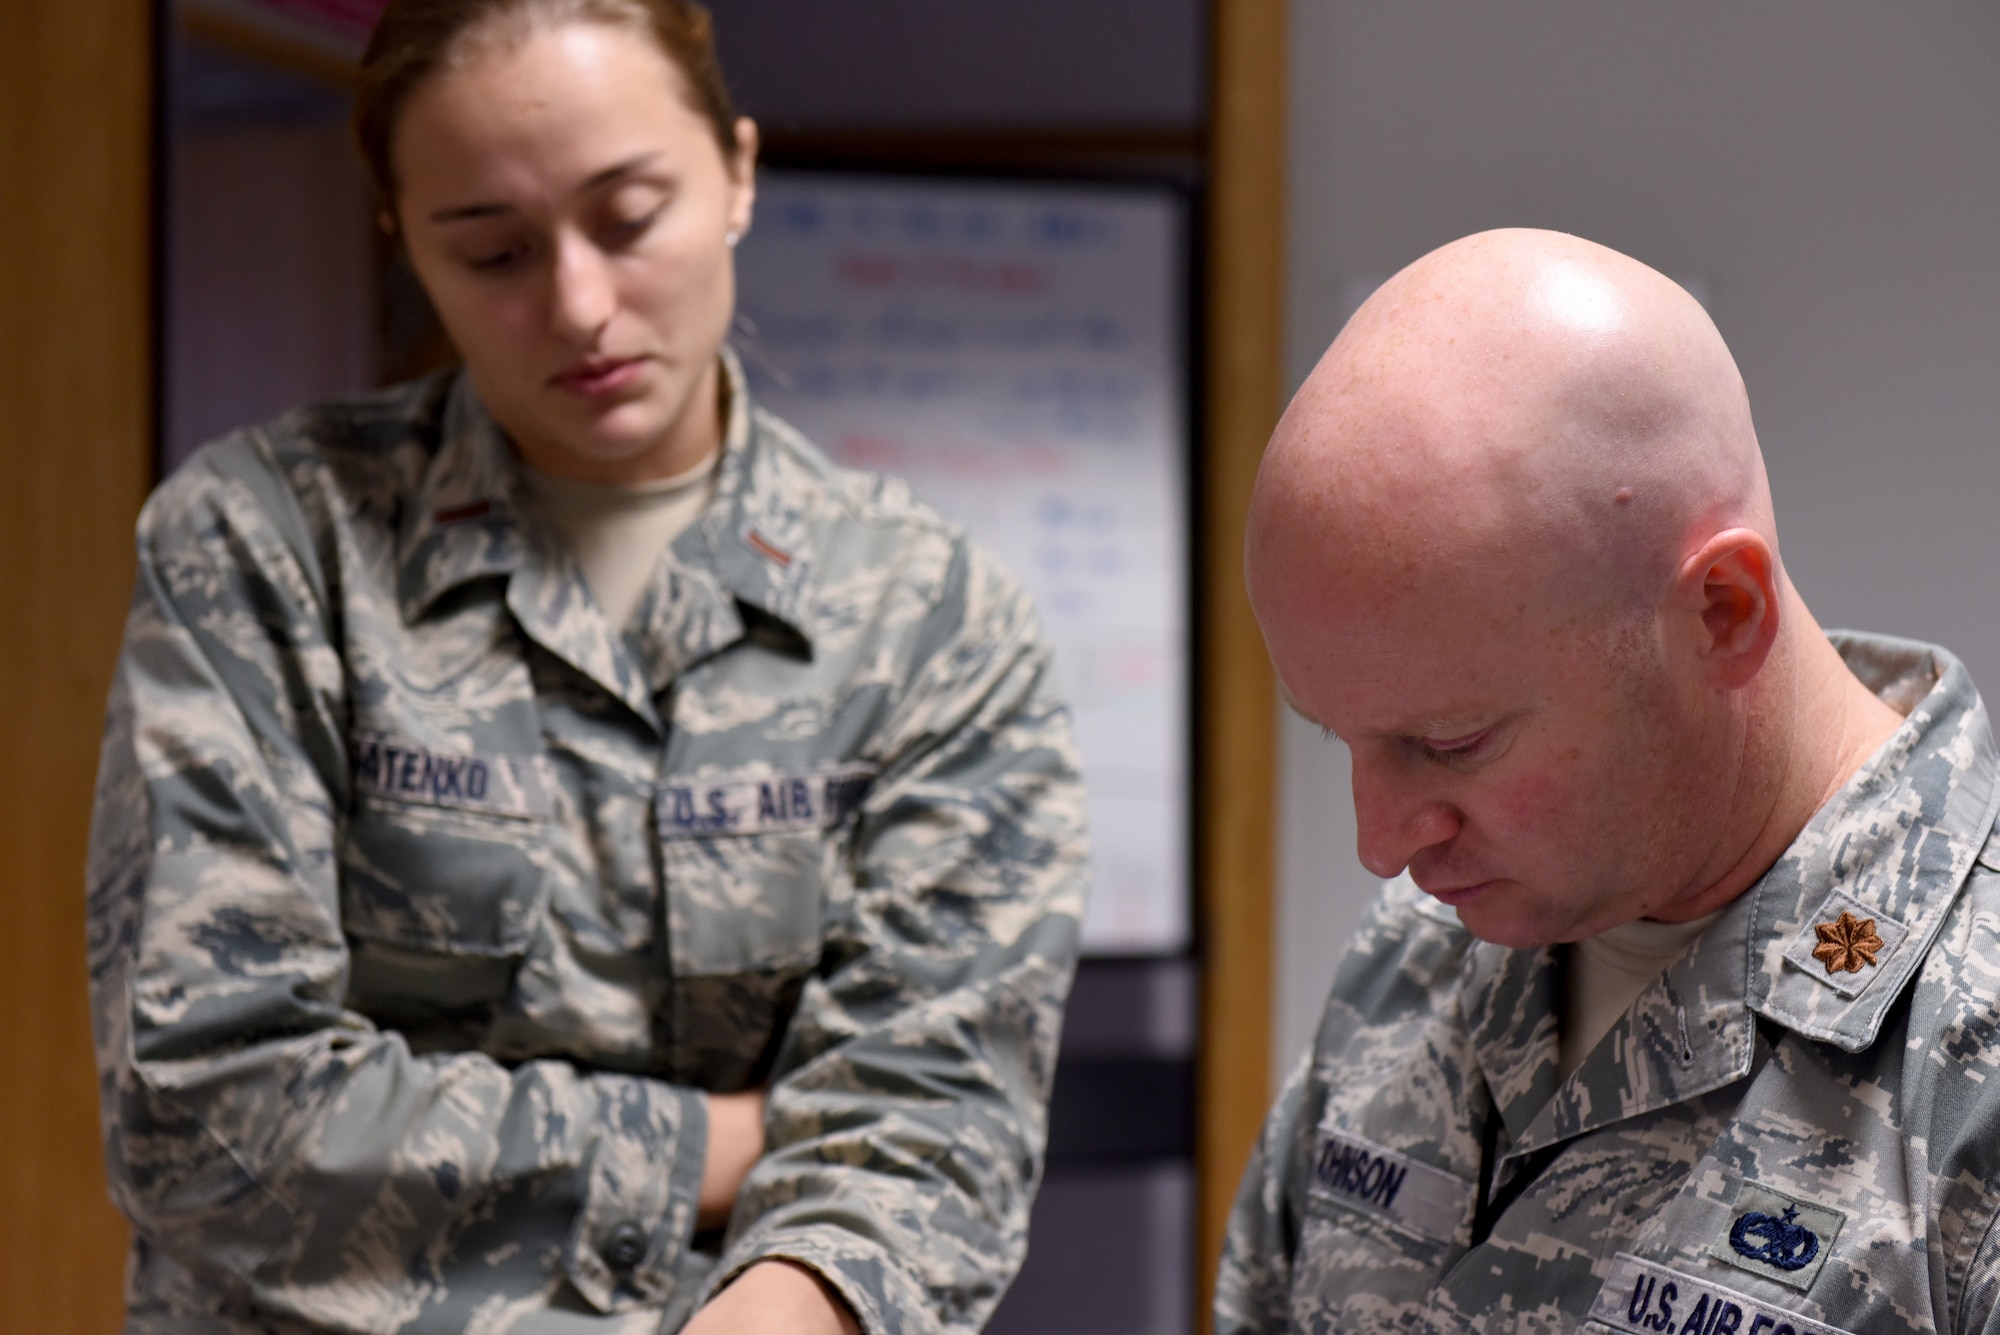 U.S. Air Force Maj. Phillip Johnson, 100th Aircraft Maintenance Squadron maintenance operations officer, discusses plans with 2nd Lt. Yelizaveta Patenko, 100th Aircraft Maintenance Squadron flight commander, at RAF Mildenhall, England, Aug. 23, 2018.  A member of the Tennessee Air National Guard, Johnson is fulfilling a 90 day deployment at RAF Mildenhall as part of Total Force Integration.  (US. Air Force photo by Senior Airman Lexie West)